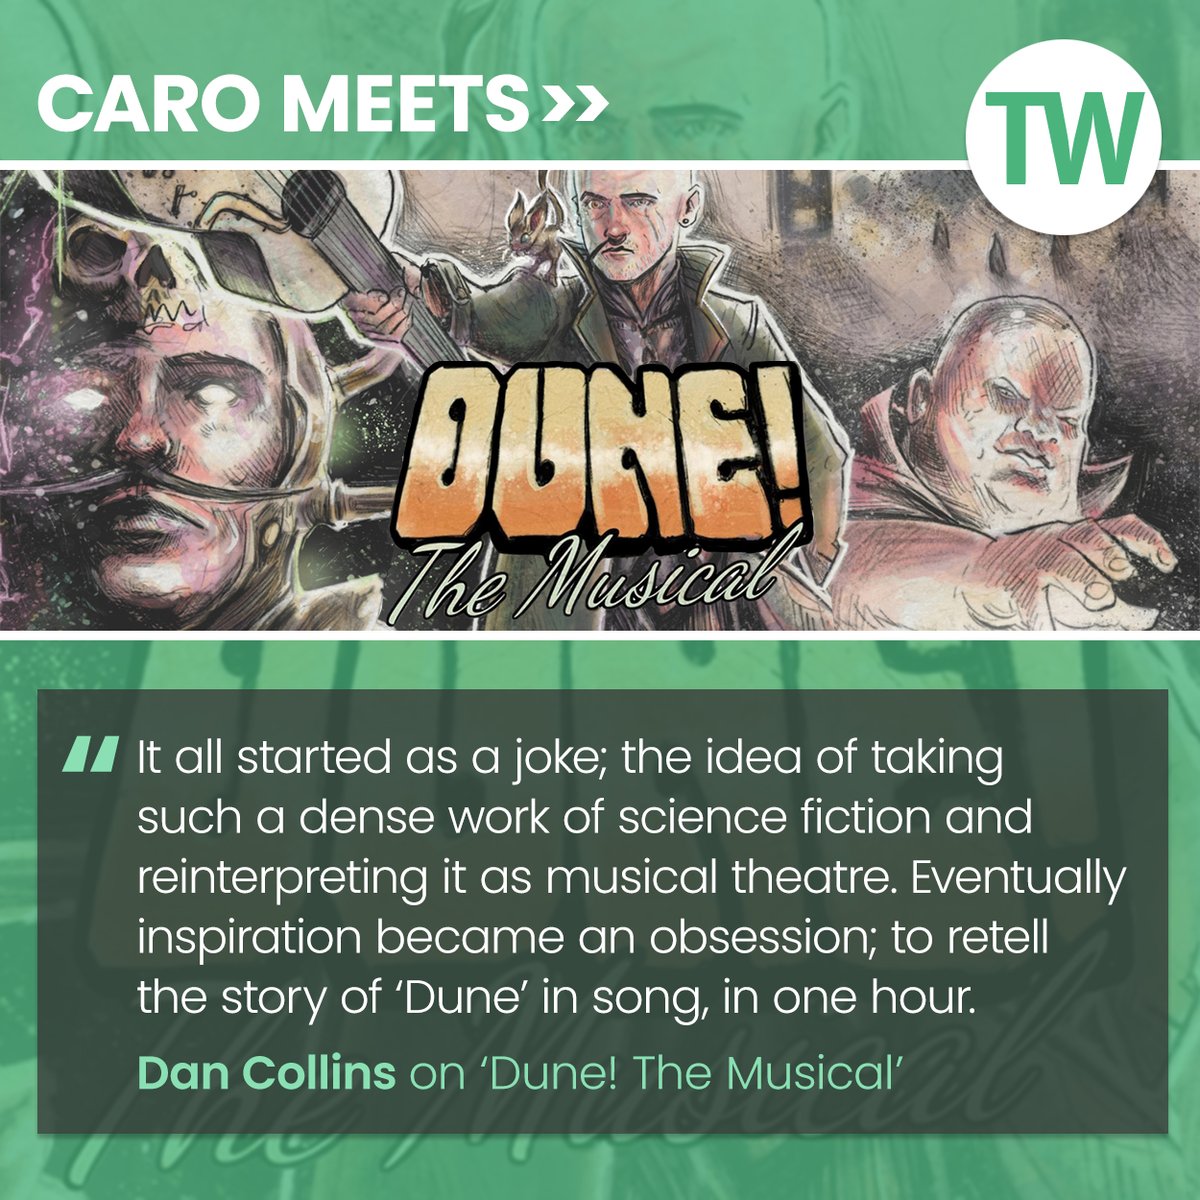 This week Caro Meets Dan Collins to discuss his show 'Dune! The Musical' at the Bread & Roses Theatre: bit.ly/3TPs623 @BreadandRosesTC